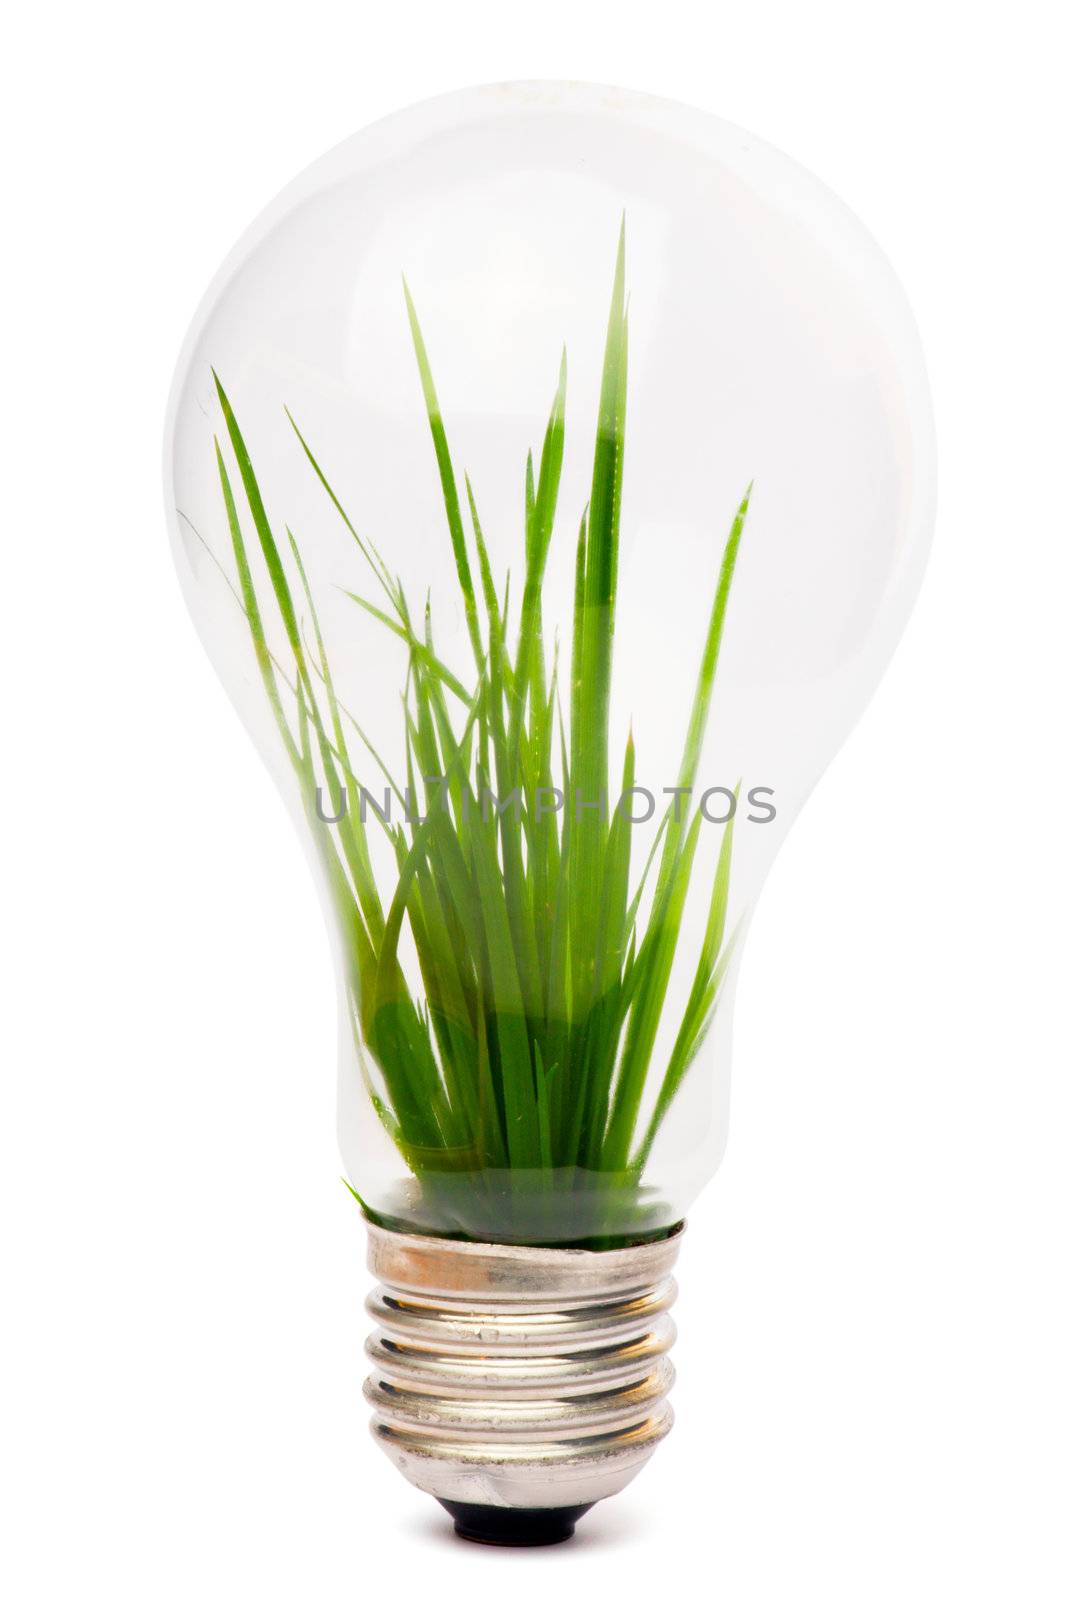 lightbulb with plant growing inside by Bedolaga